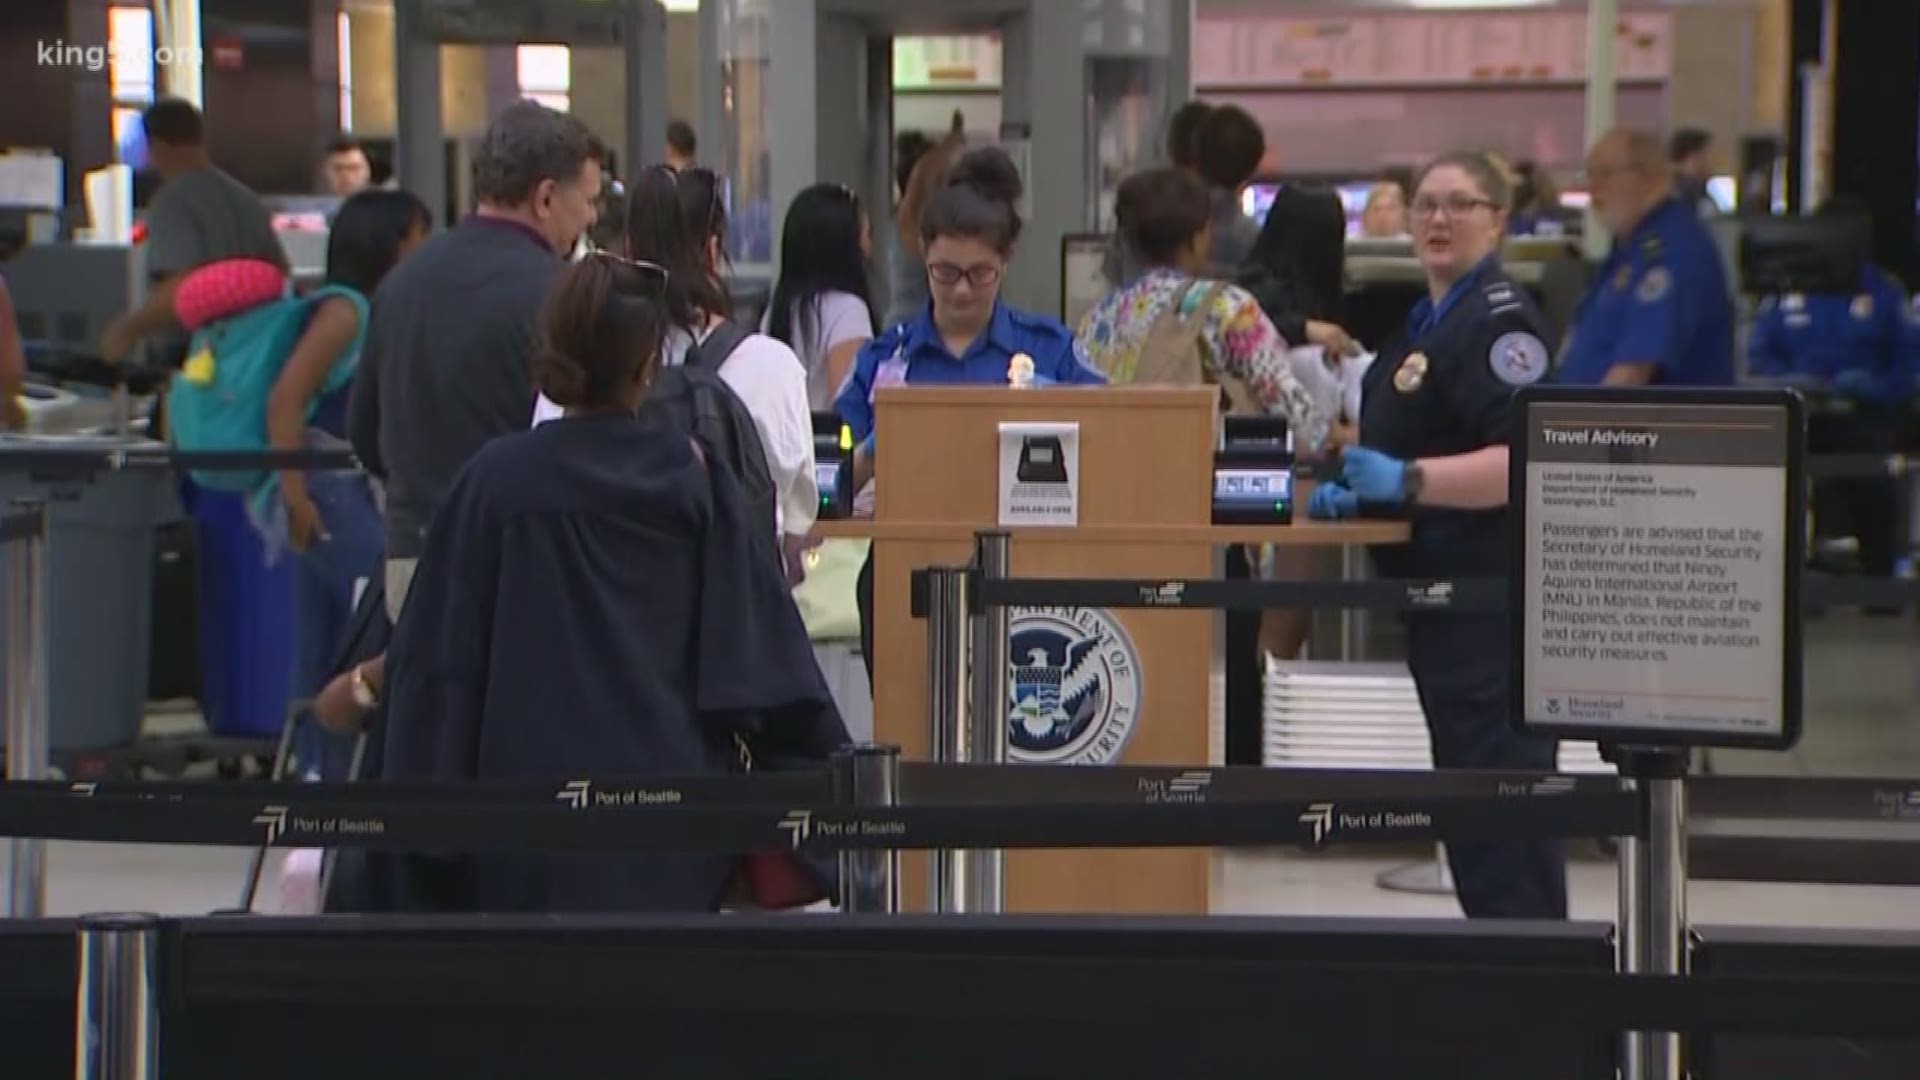 Senator Maria Cantwell has asked the TSA to keep screeners at Sea-Tac Airport, instead of deploying them to the US-Mexico border. KING 5's Michael Crowe reports.